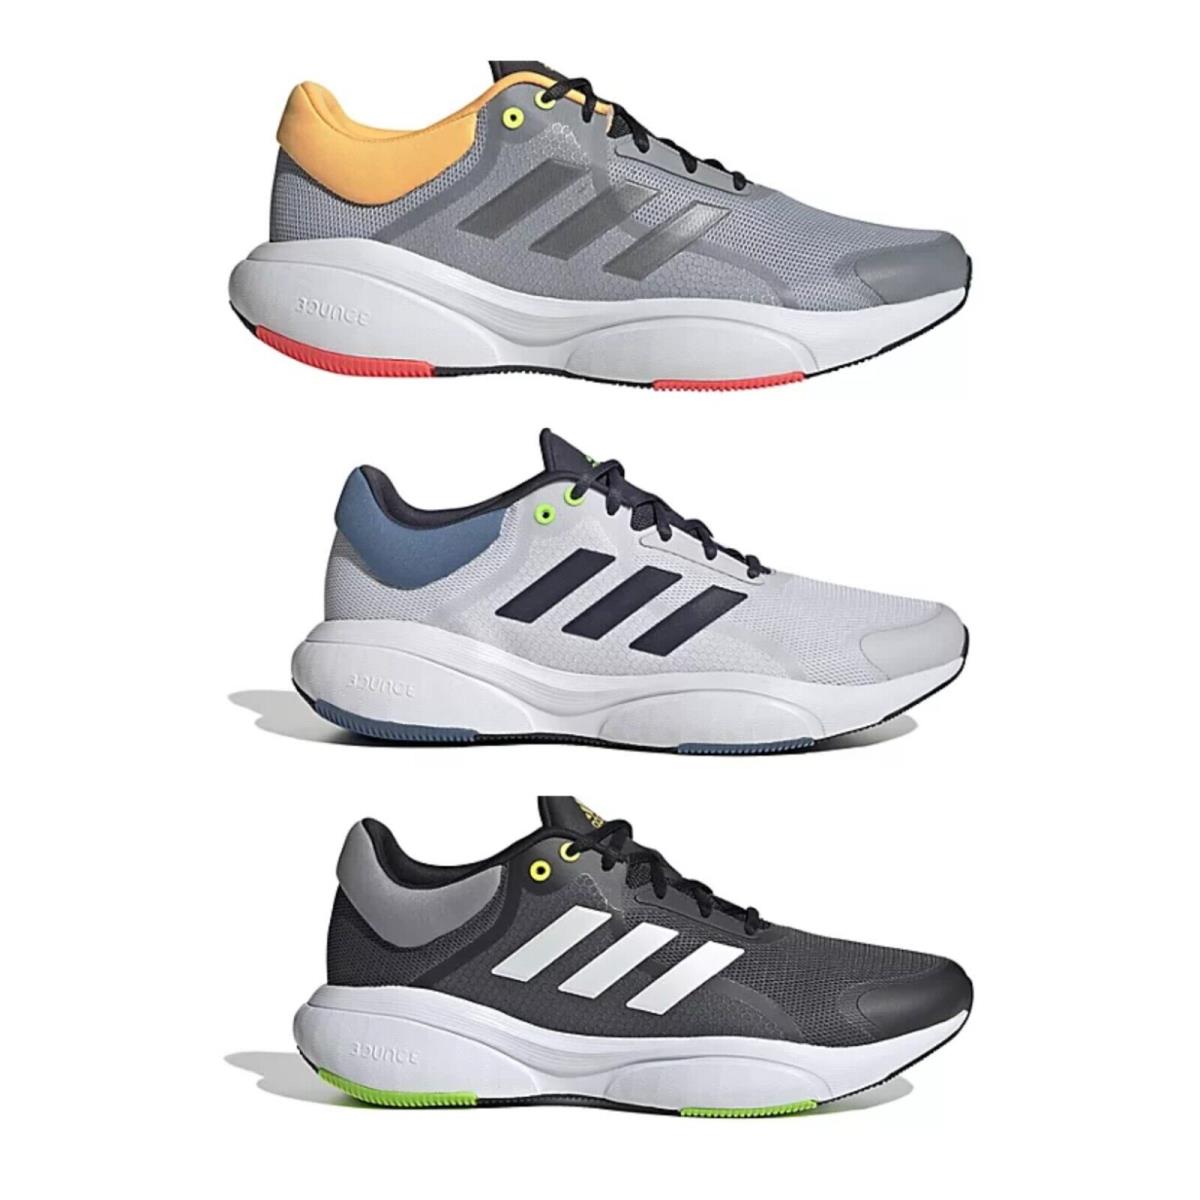 Adidas Response Solar Bounce Men`s Athletic Running Low Top Shoes Sneakers